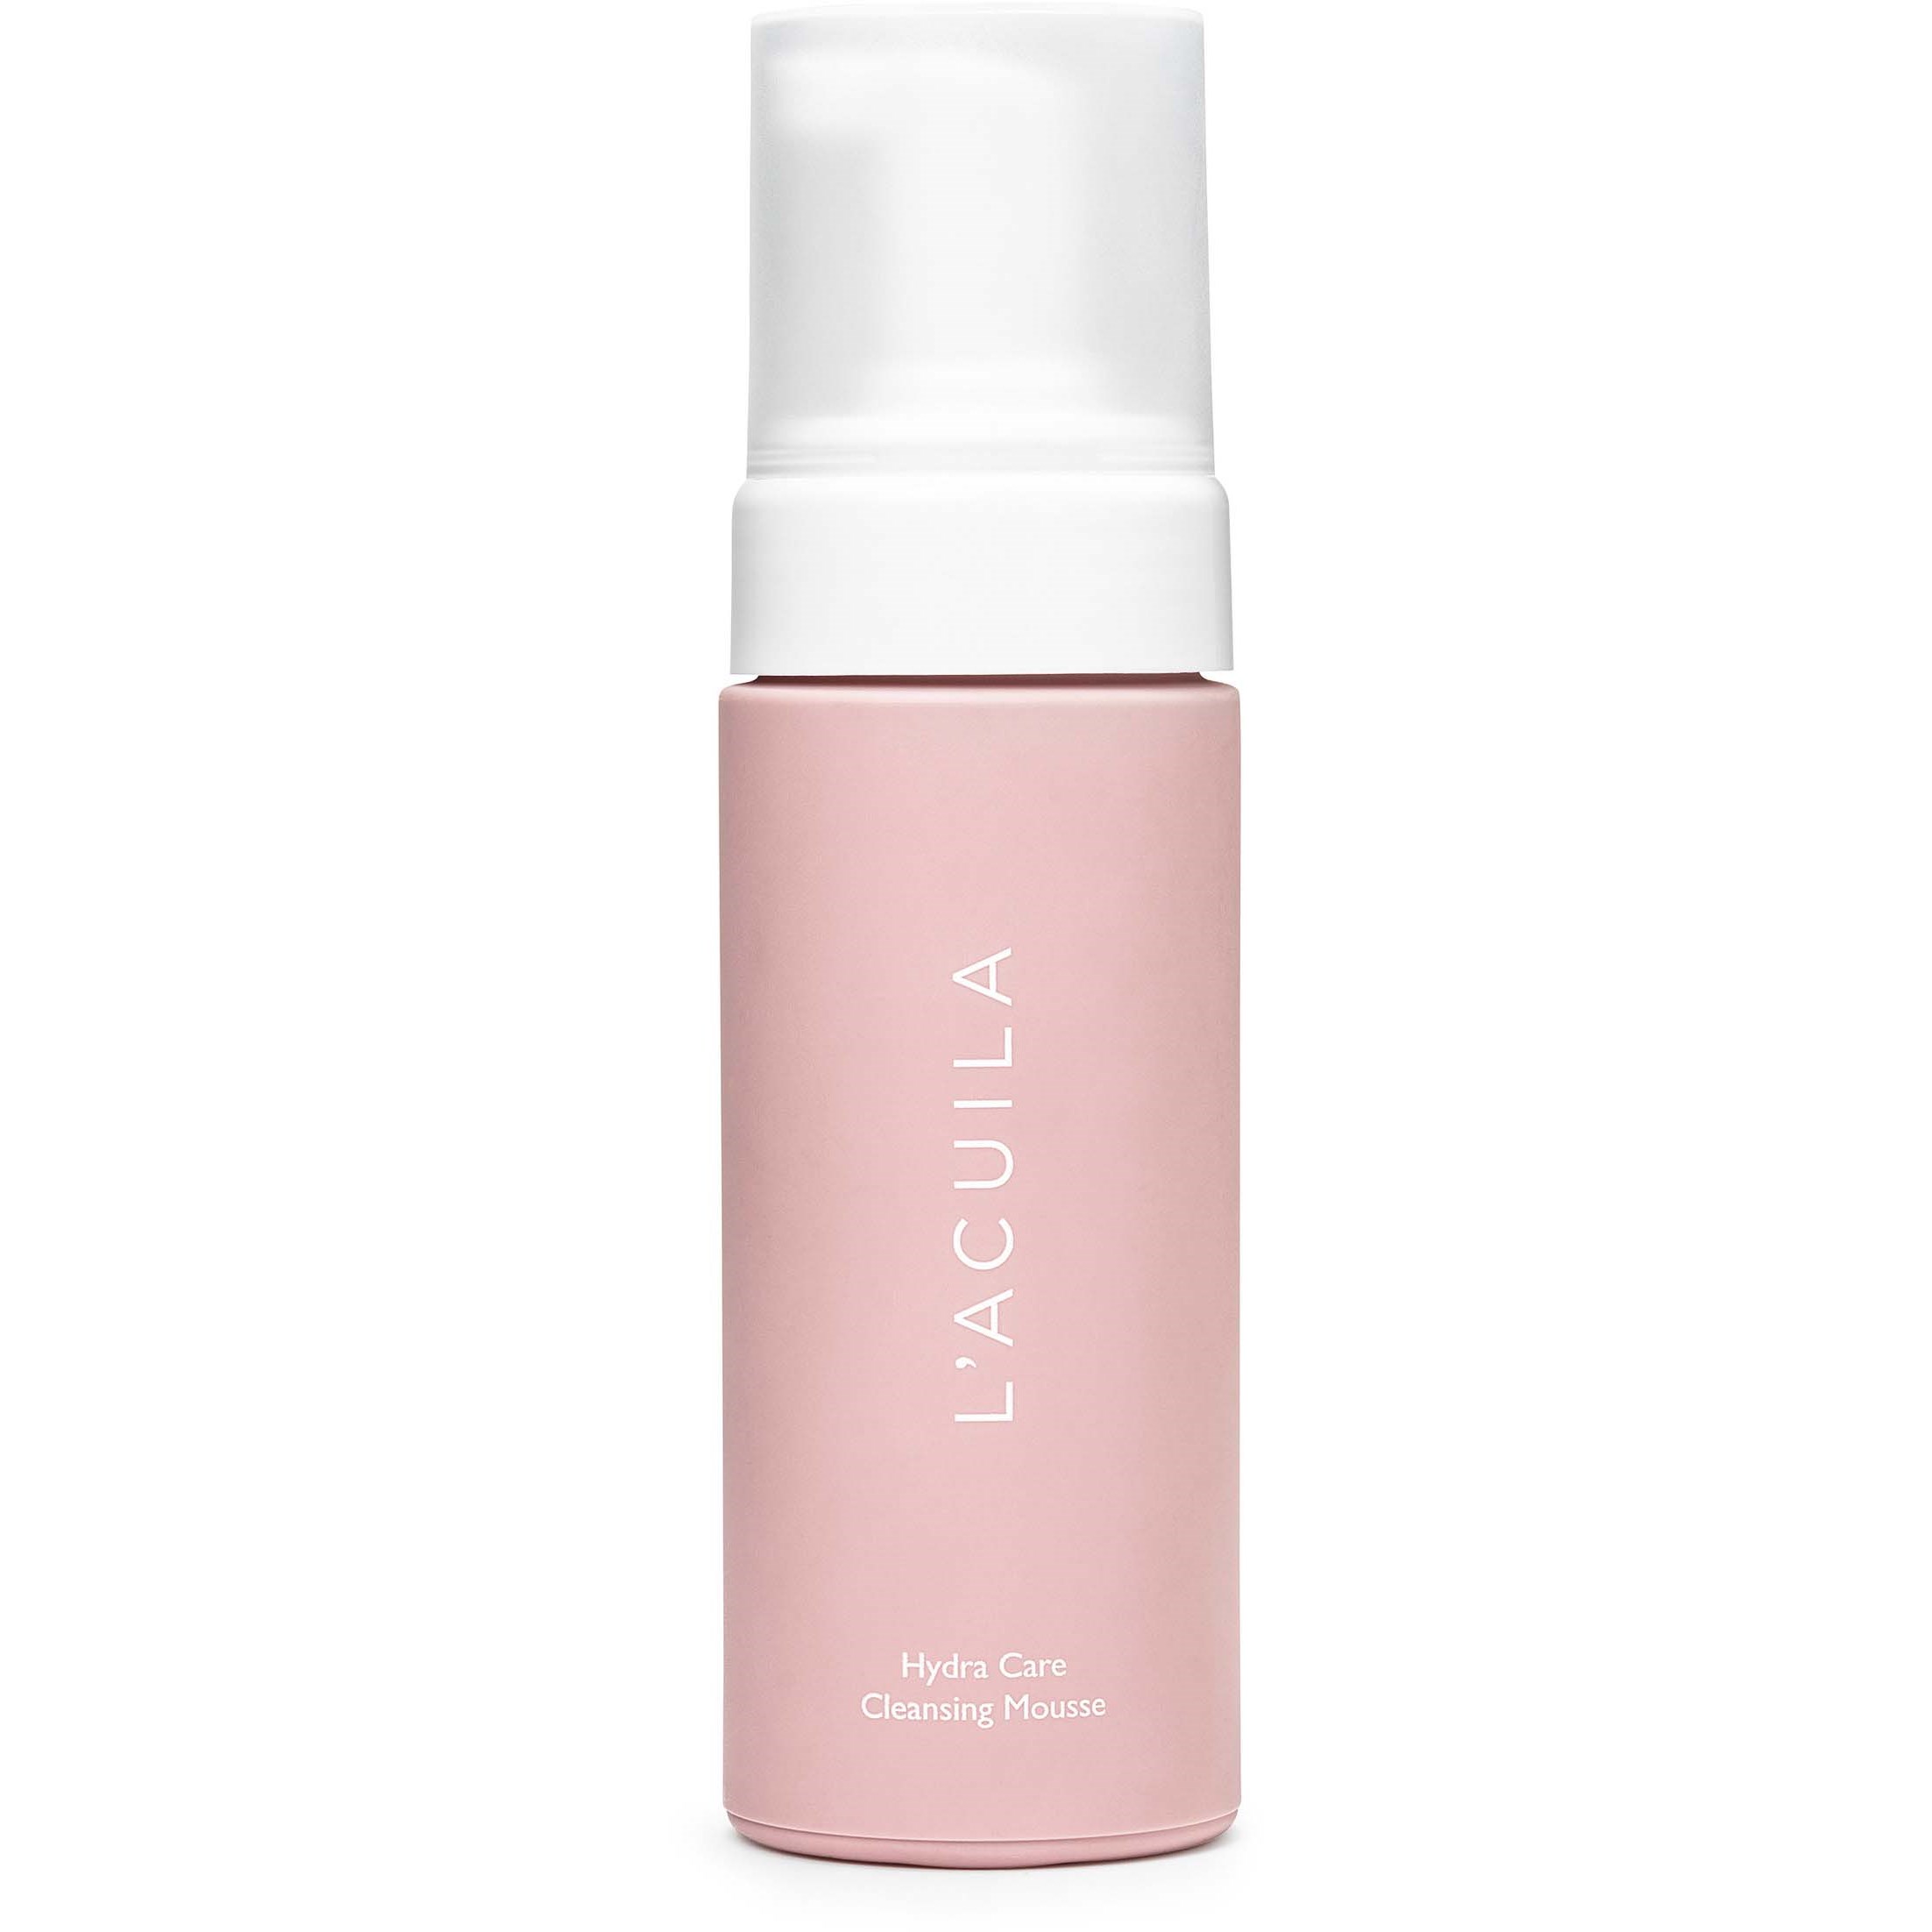 LAcuila Hydra Care Cleansing Mousse 150 ml